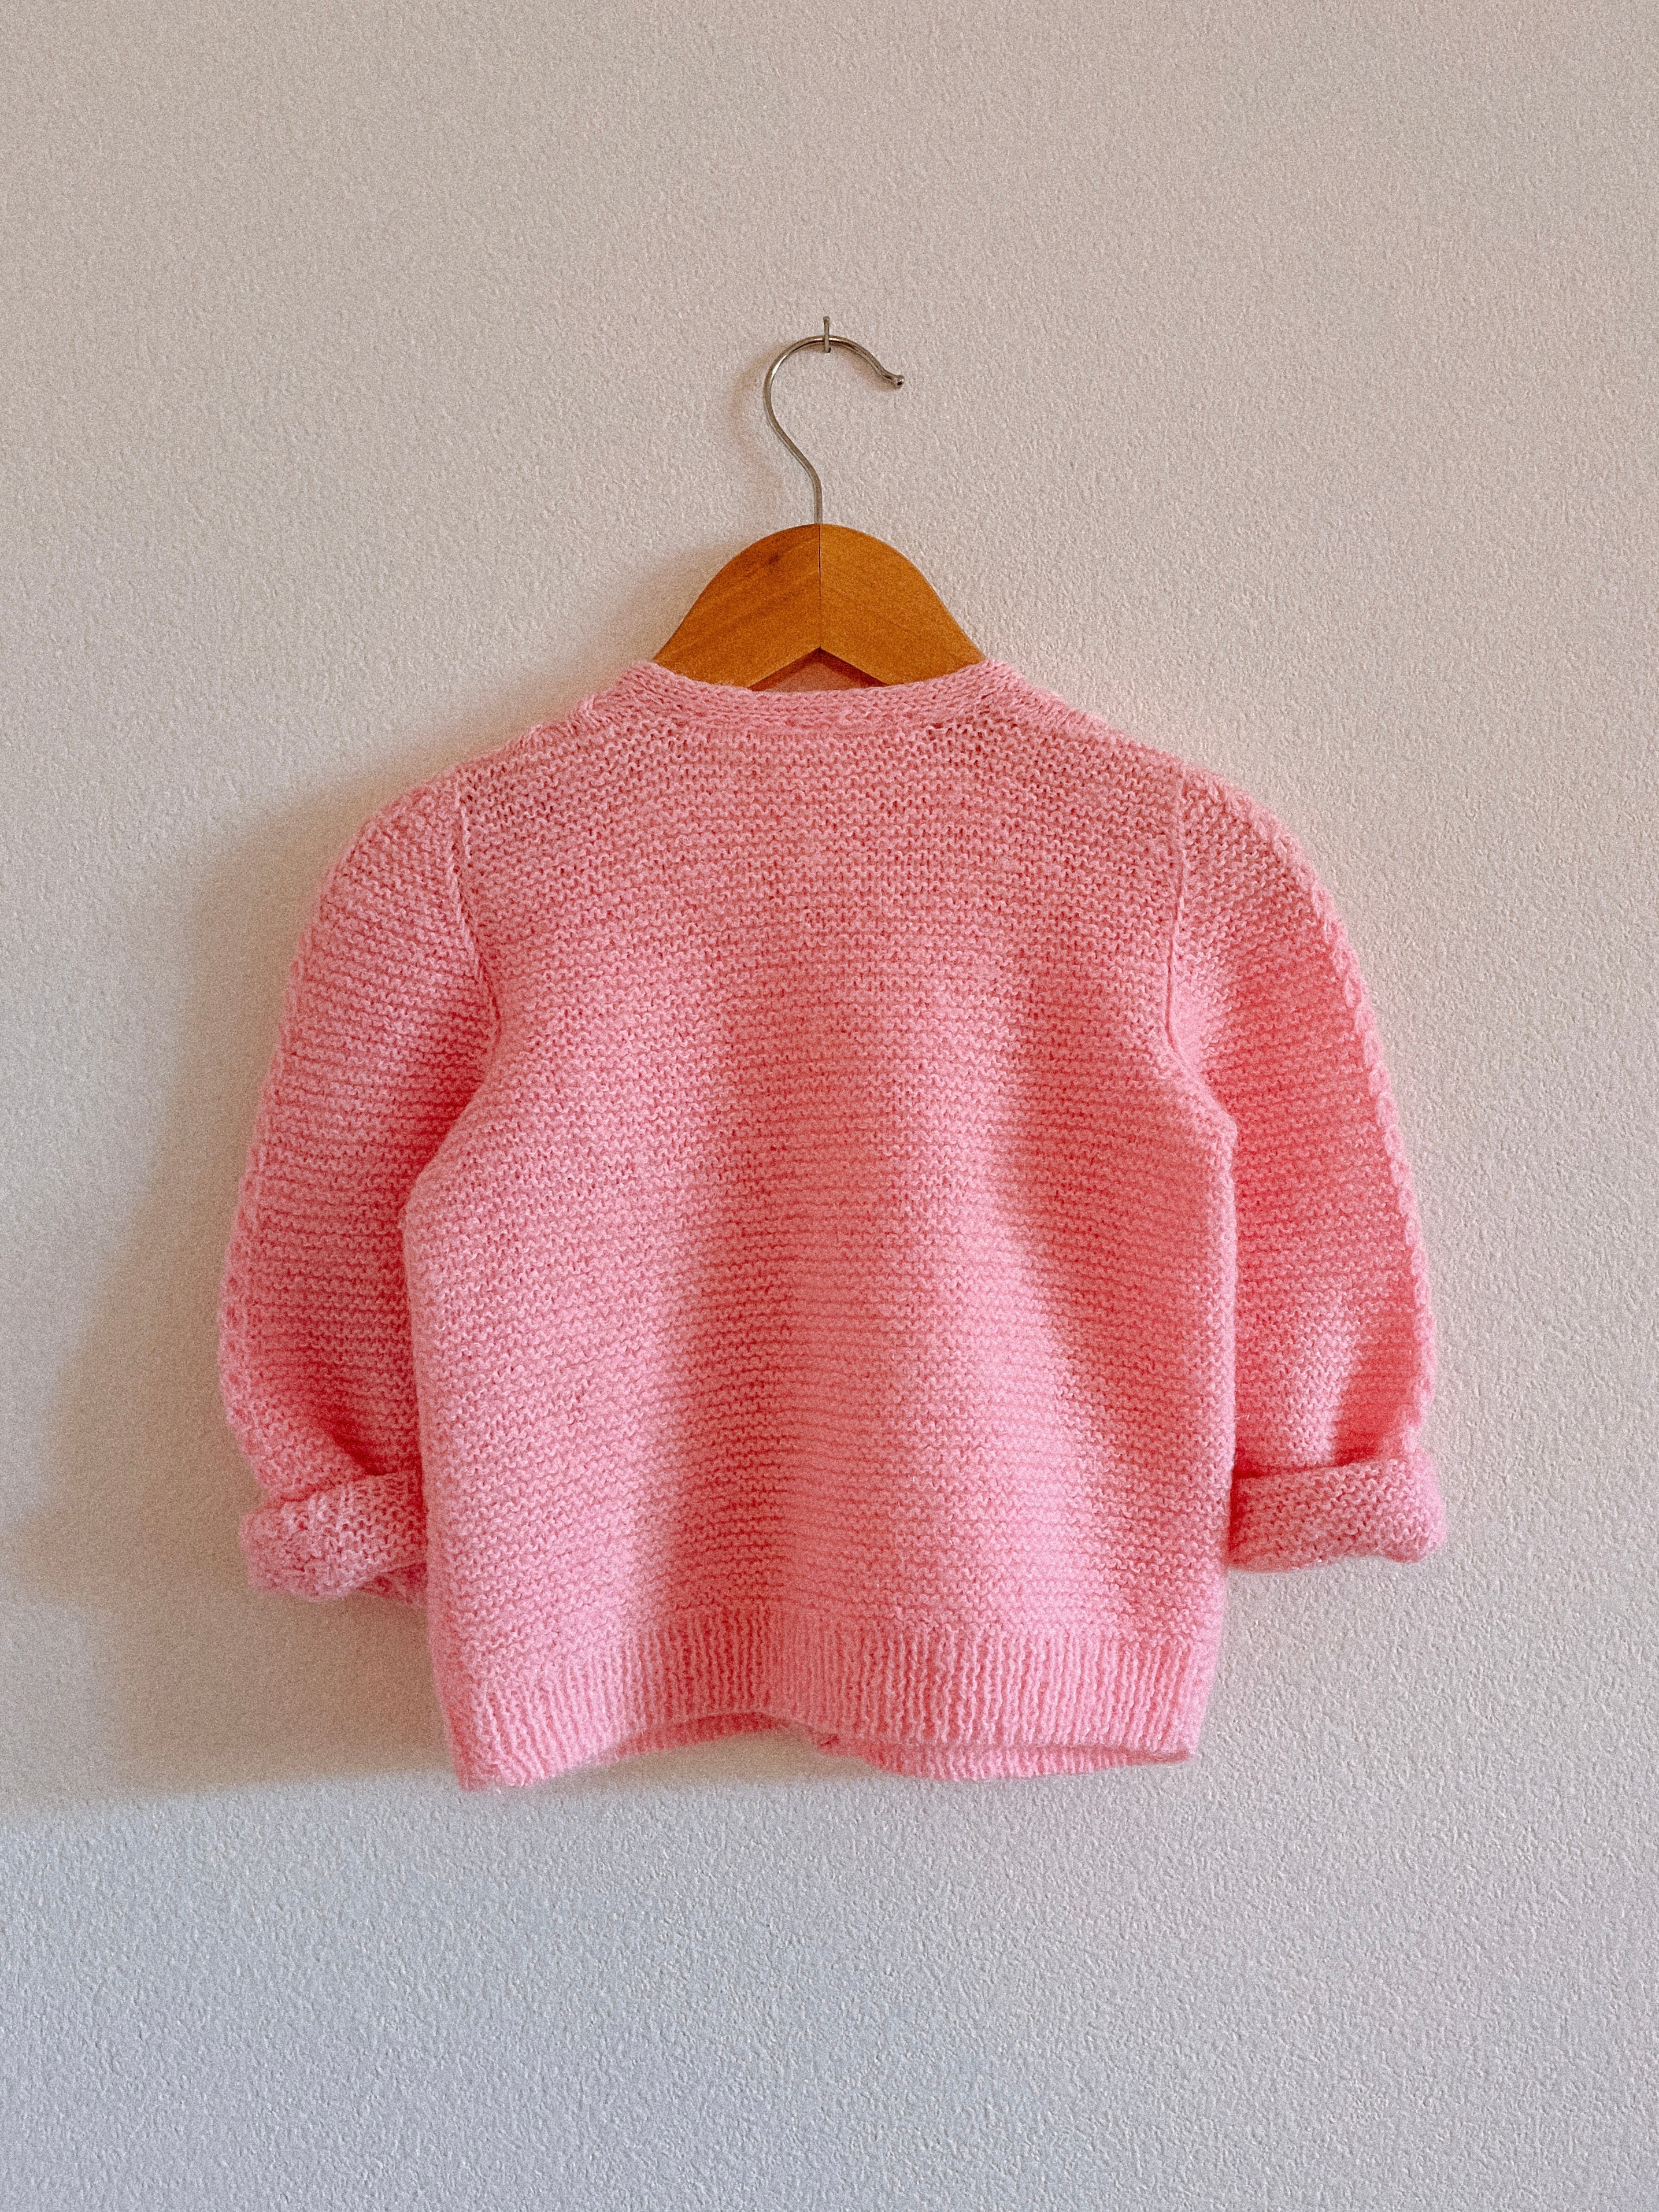 Handmade Cable Knit